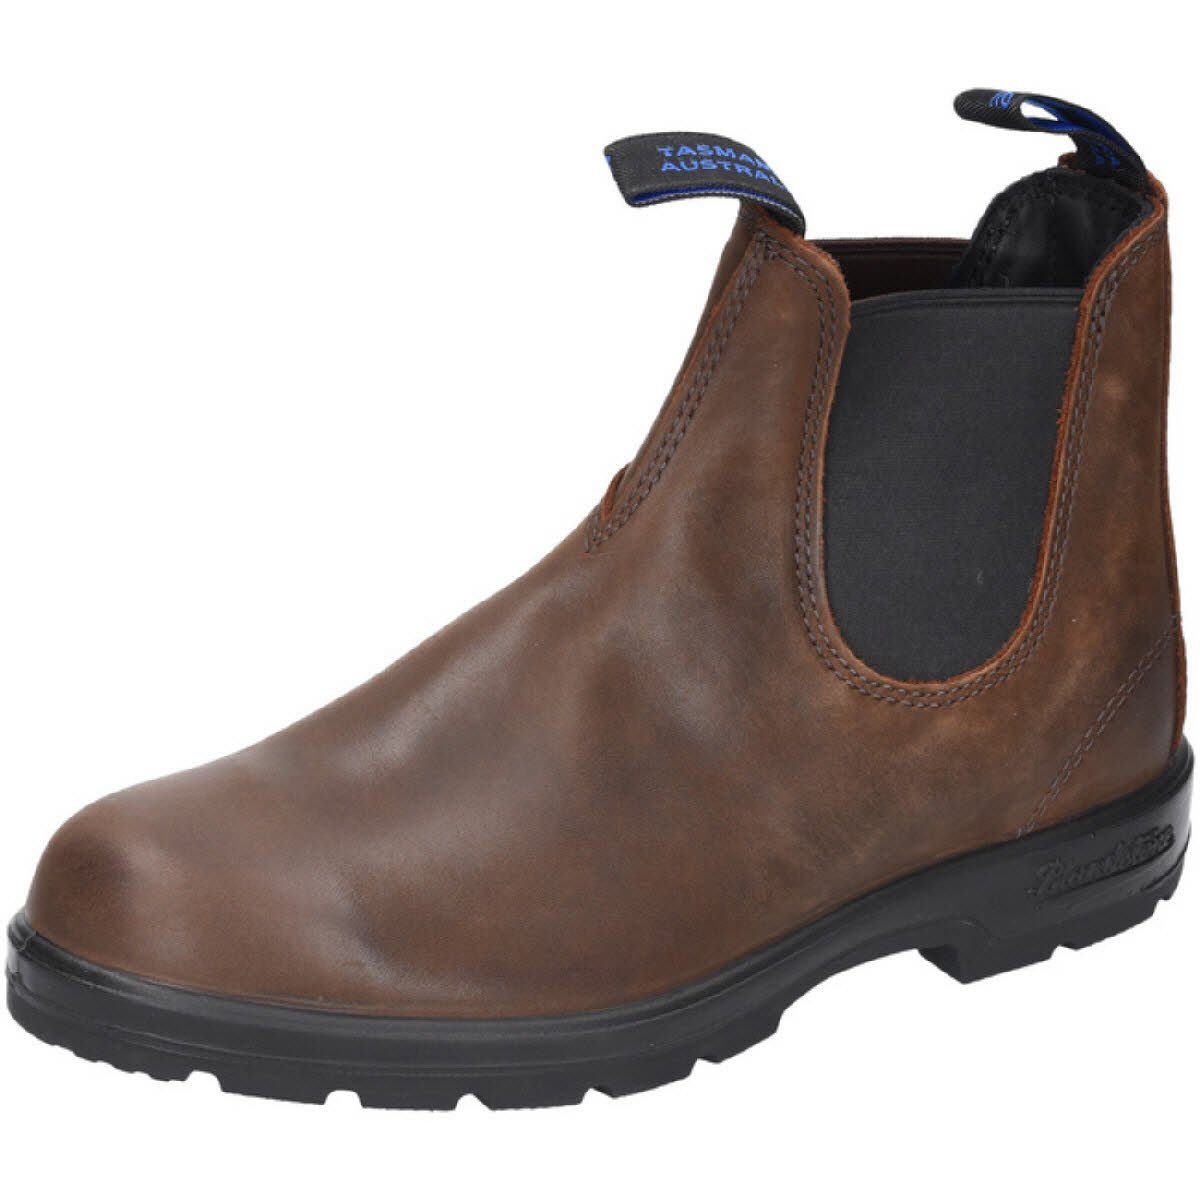 Blundstone 1477 Ankleboots